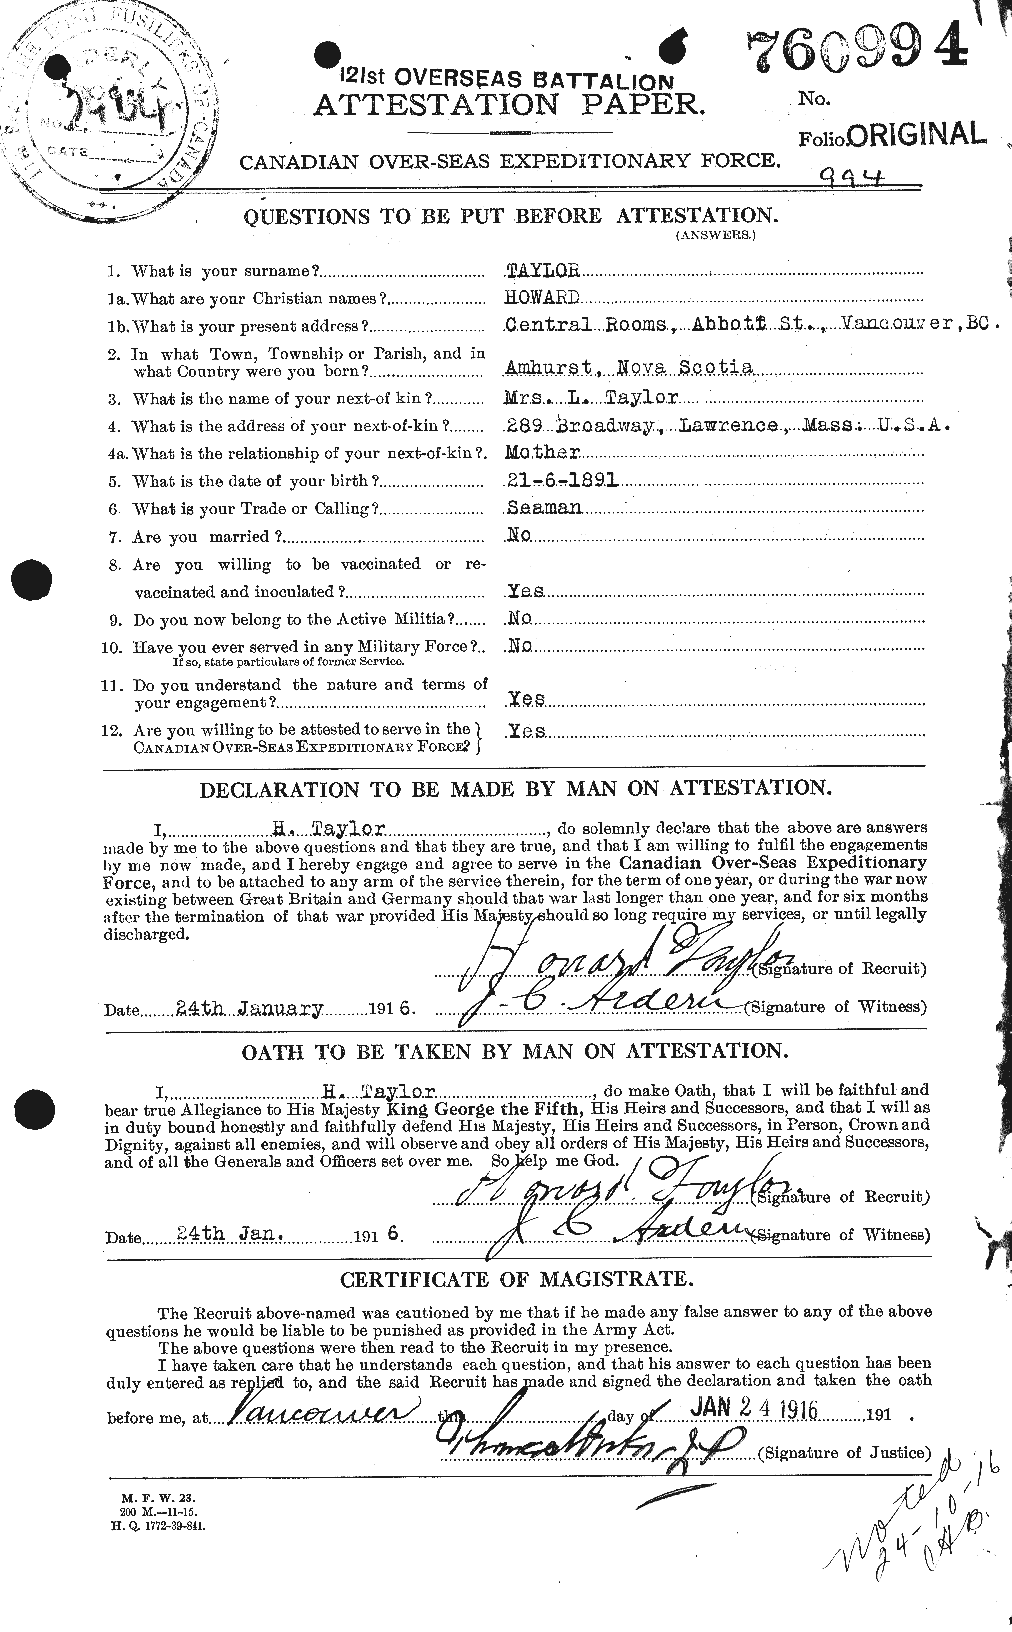 Personnel Records of the First World War - CEF 626597a